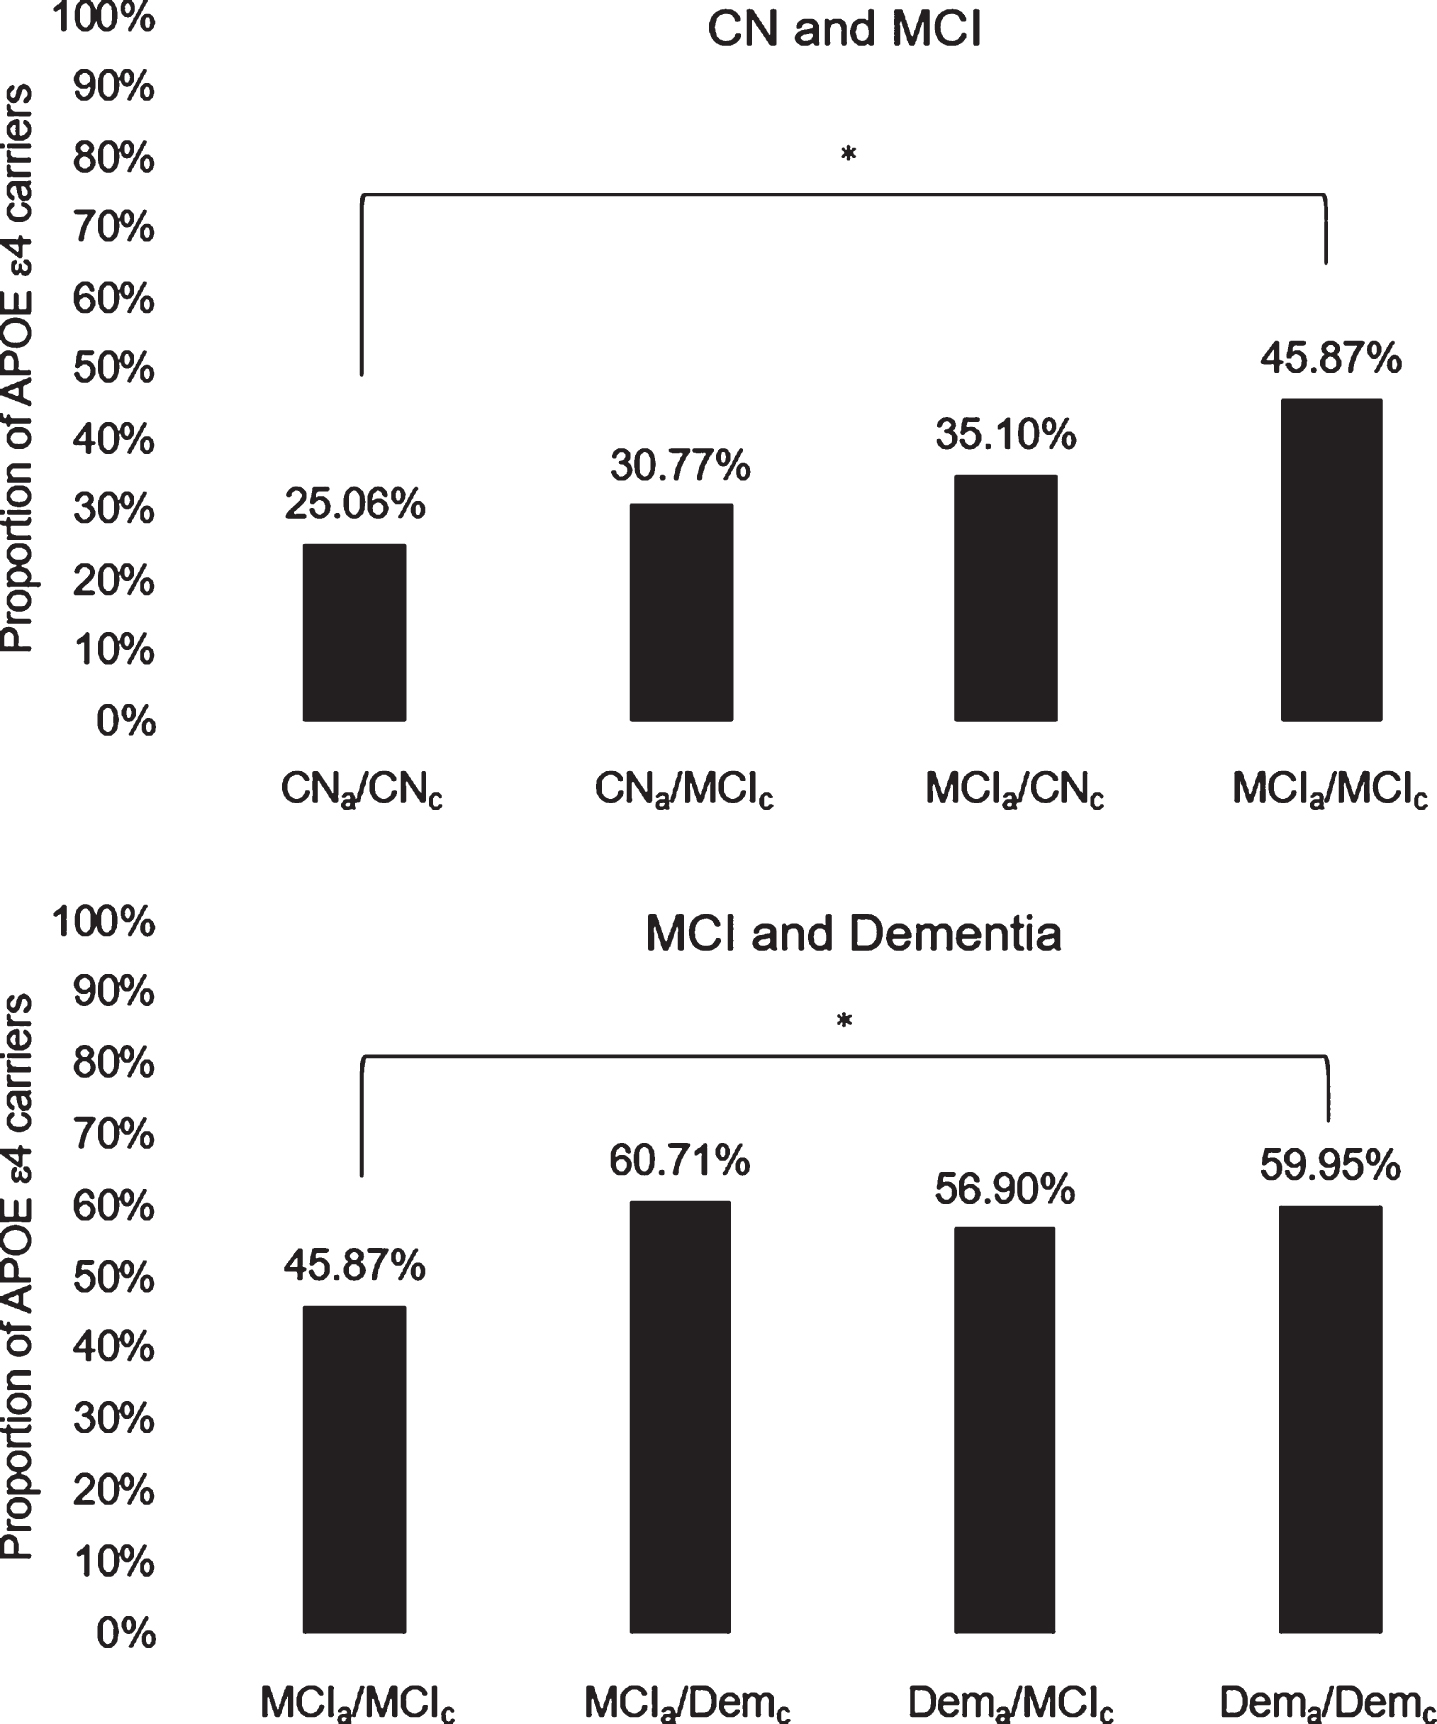 Diagnostic agreement/discrepancy group differences on APOE ɛ4 carrier status across CN and MCI groups (top) and MCI and dementia groups (bottom). APOE, apolipoprotein E; CN, cognitively normal; MCI, mild cognitive impairment; Dem, dementia; subscripts “a” and “c” indicate actuarial and consensus diagnoses, respectively; *denotes significant group difference following Bonferroni correction for multiple comparisons.